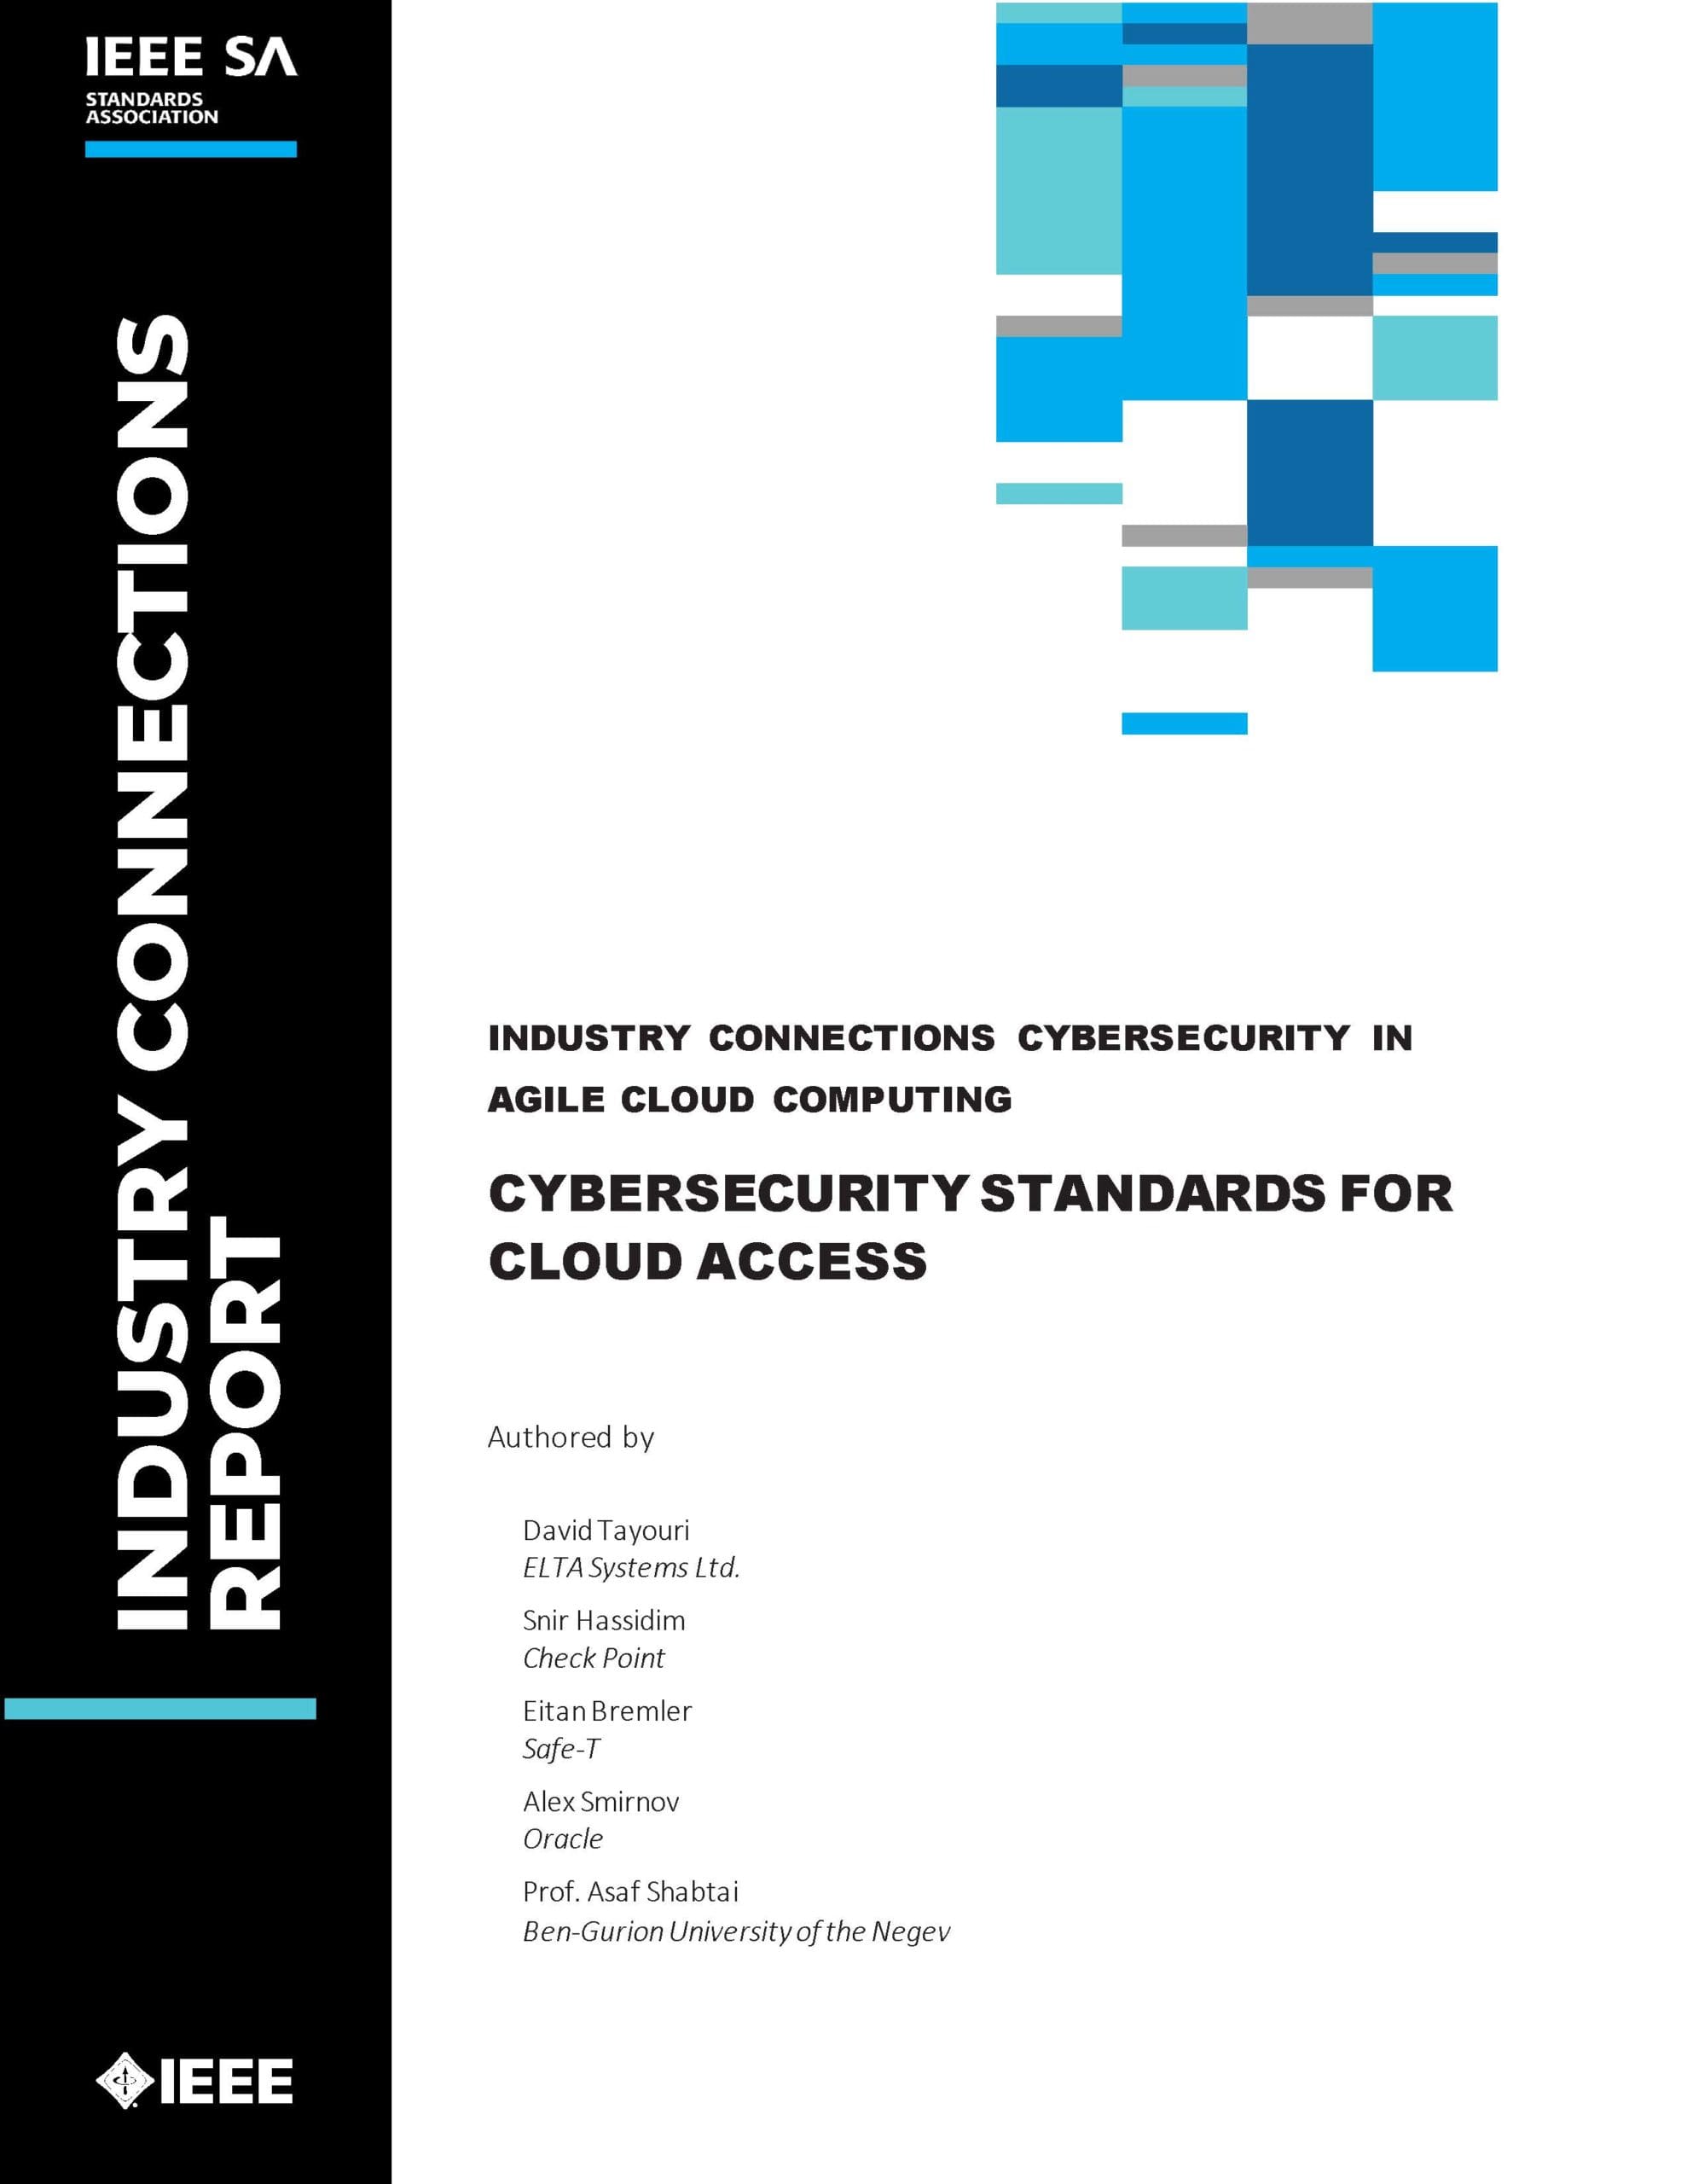 IEEE SA Industry Connections Report. Industry Connections Cybersecurity in Agile Cloud Computing. Cybersecurity Standards for Cloud Access